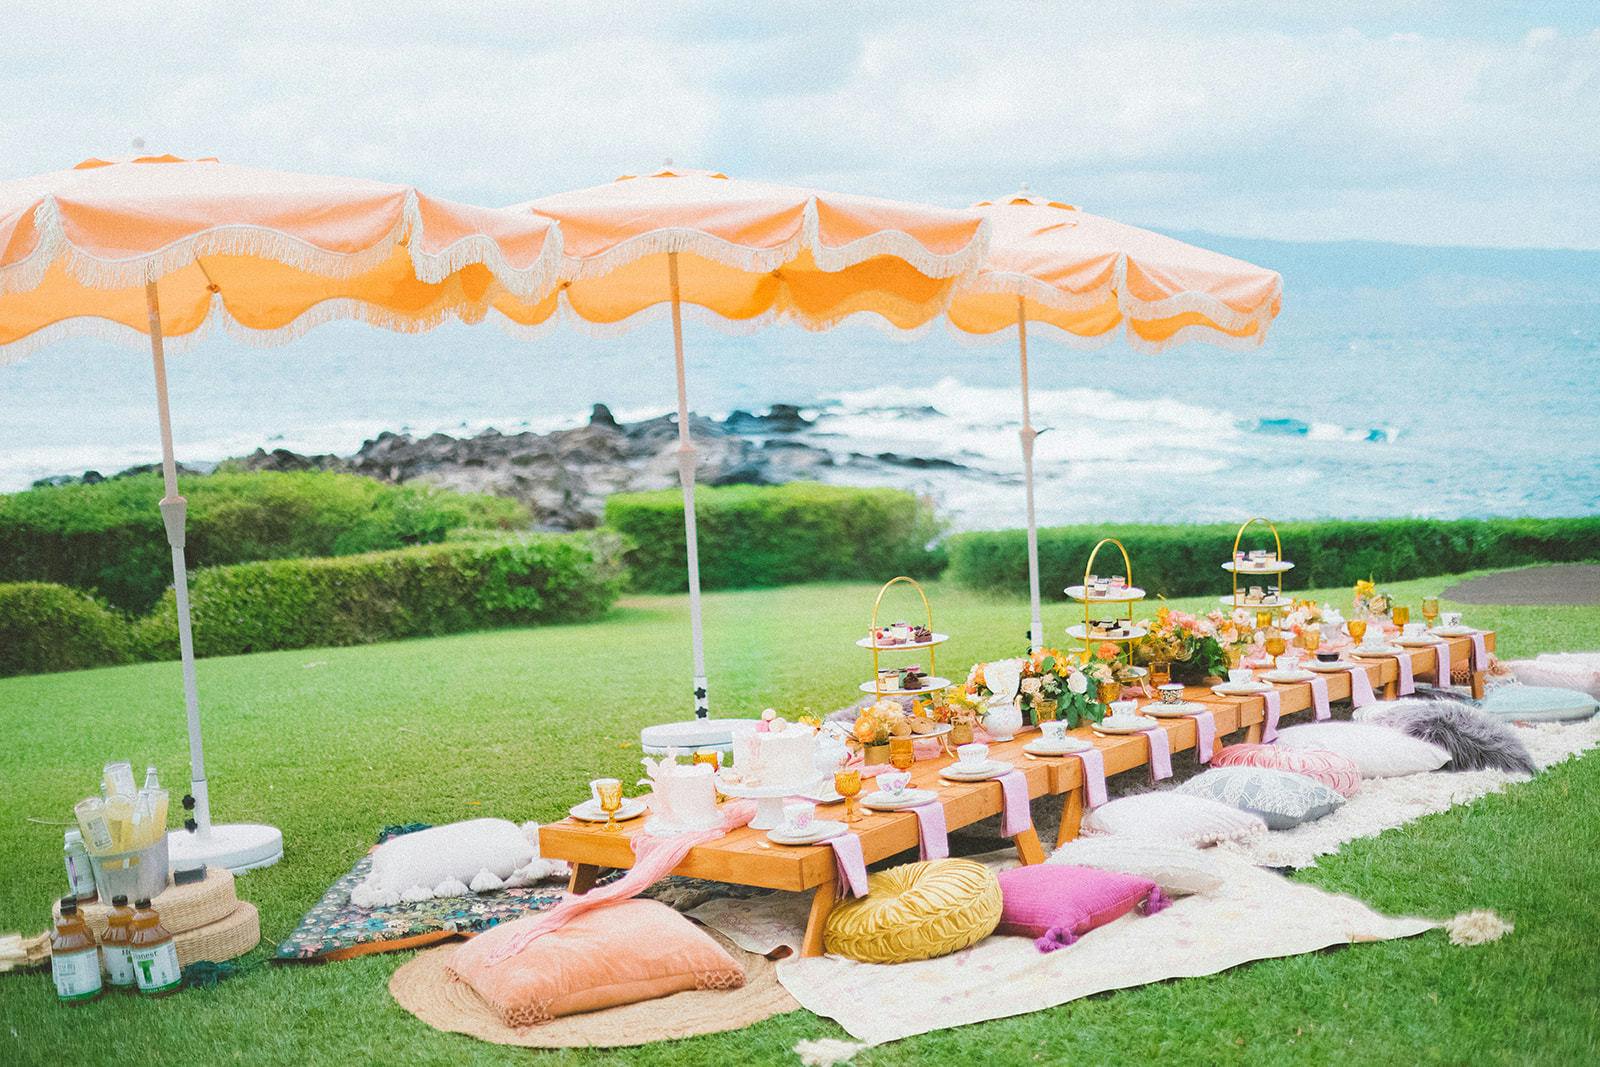 Tropical Orange Pink and White Oceanfront High Tea Party at Montage Kapalua Bay in Kapalua, HI with Ocean in the Background and Pillows on the Ground Around a Low Table with Umbrellas | PartySlate